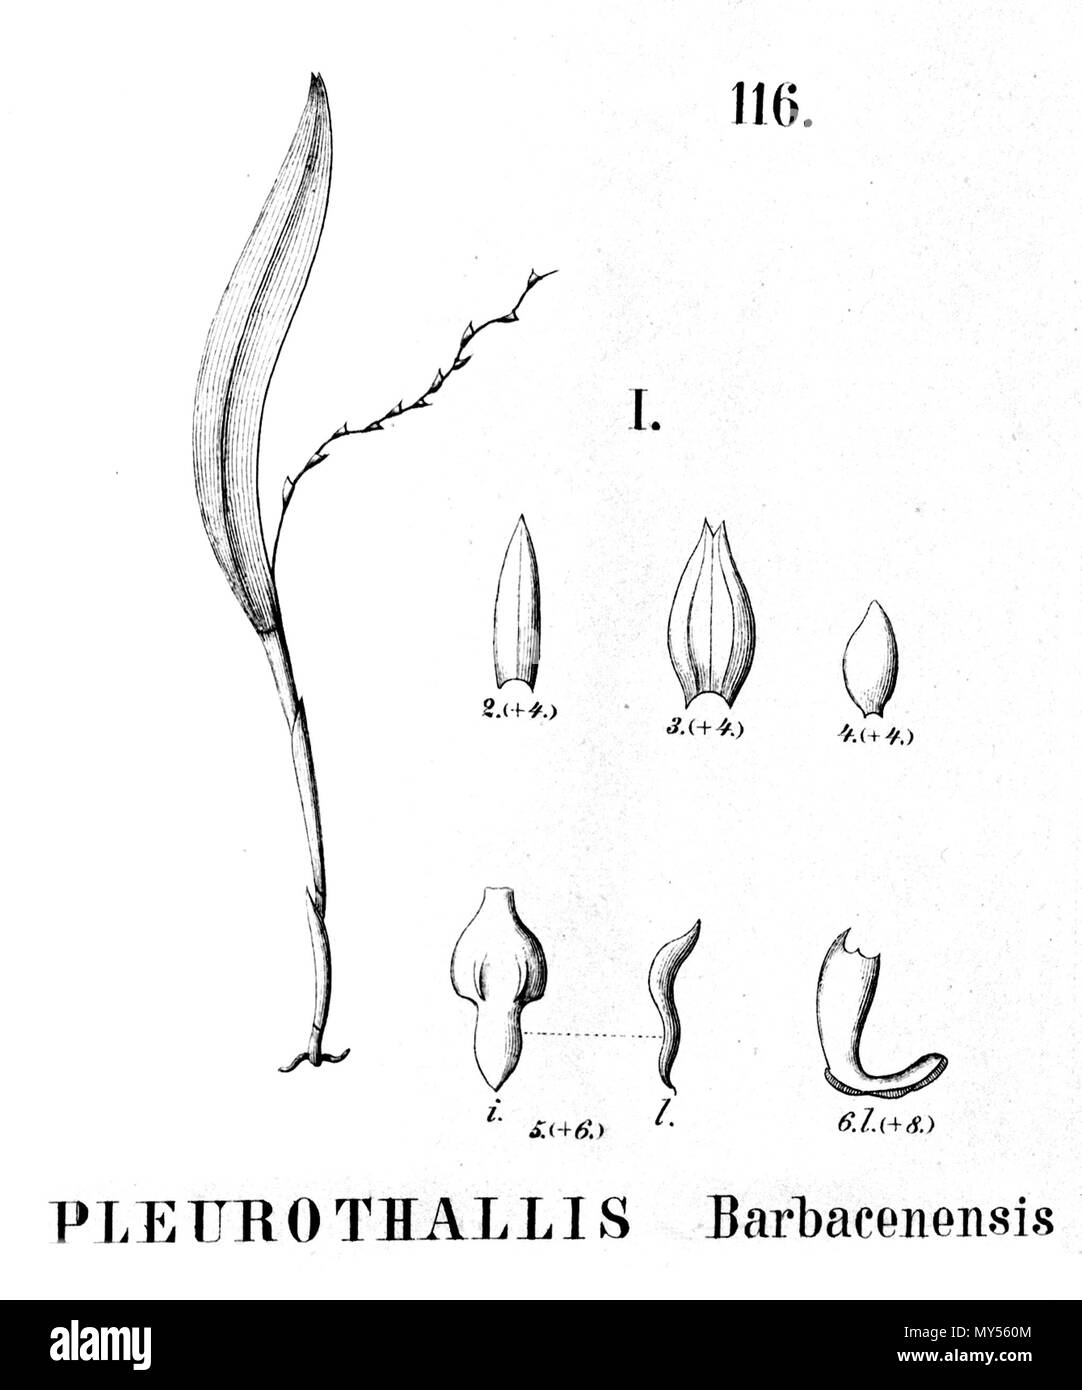 . Illustration of Acianthera hygrophila (as syn. Pleurothallis barbacenensis) . between 1893 and 1896. Alfred Cogniaux (1841 - 1916) 22 Acianthera hygrophila (as Pleurothallis barbacenensis - cut from Fl.Br.3-4-116 - fig. I Stock Photo